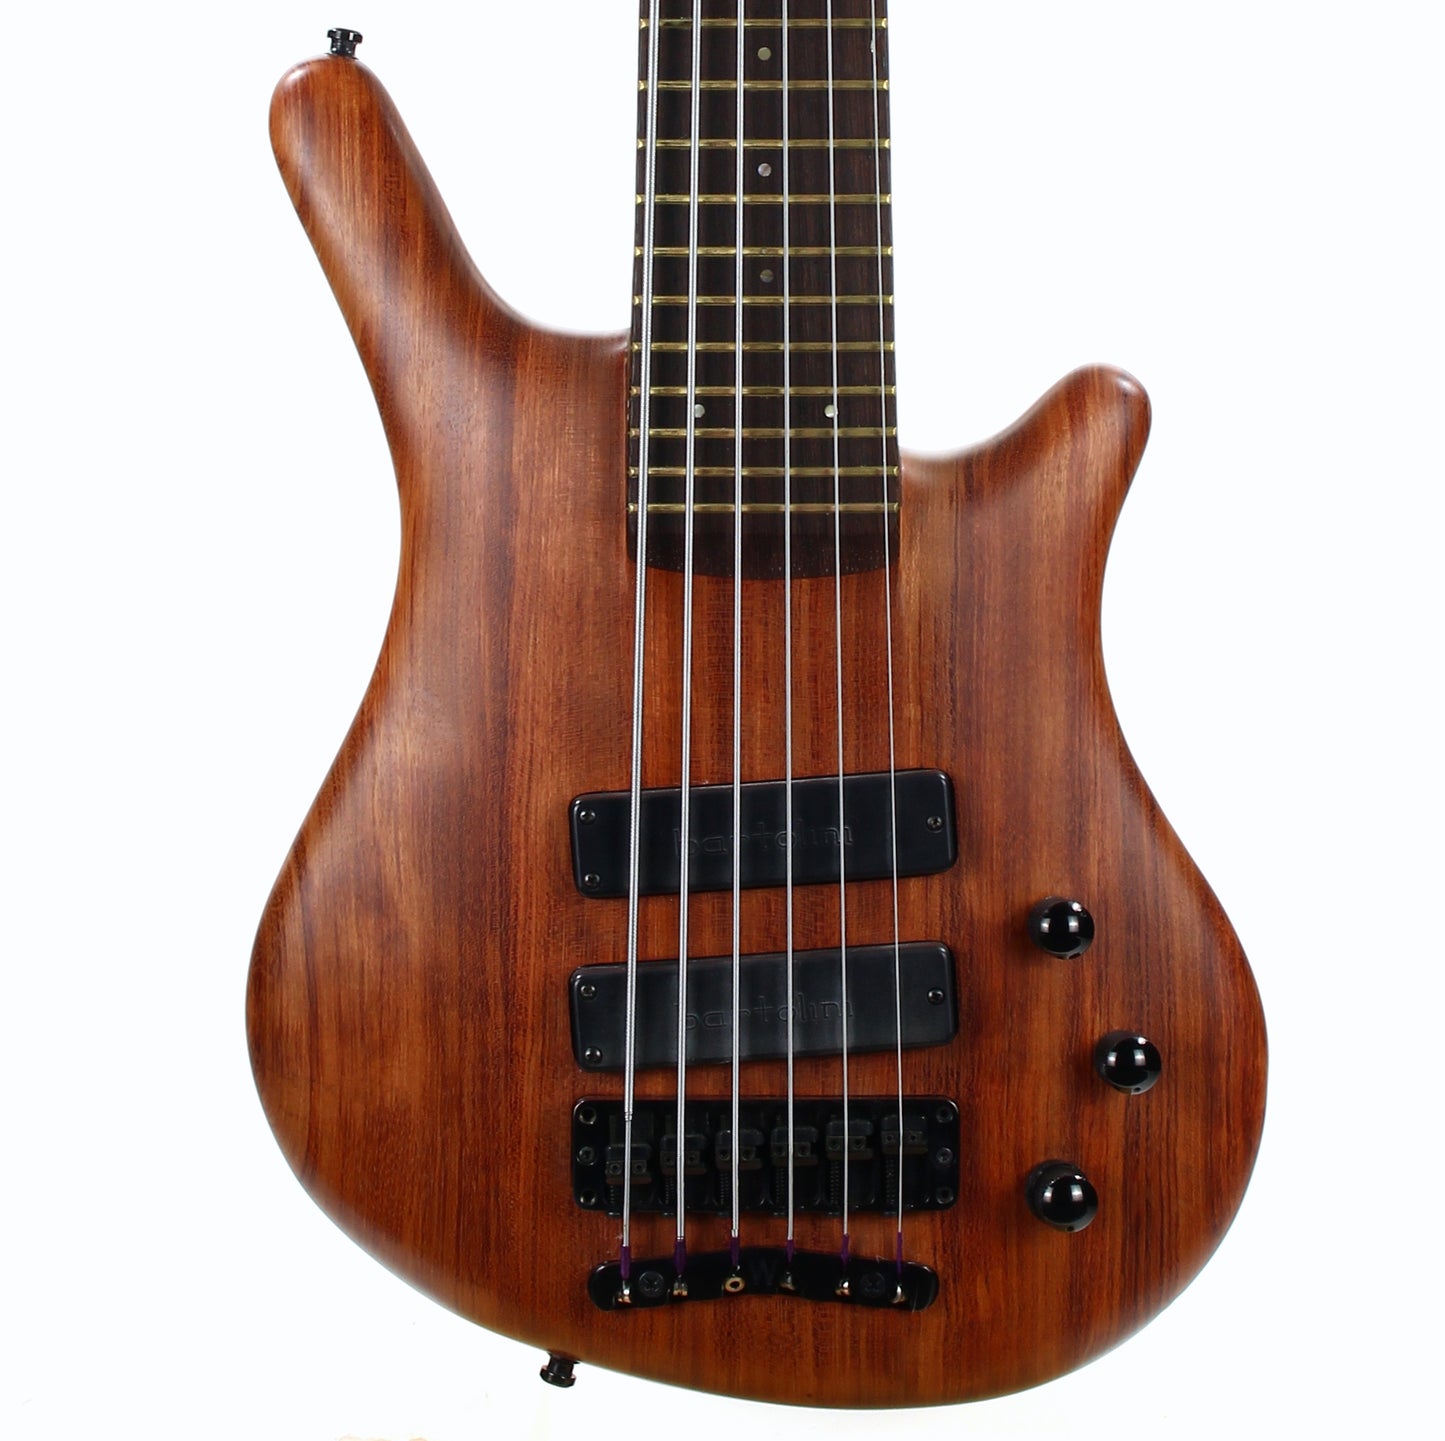 MINTY 1990 Warwick Thumb NT 6 String Electric Bass - Neck Thru, One Owner, Made in Germany, Bubinga, Wenge, Natural Oil Finish!